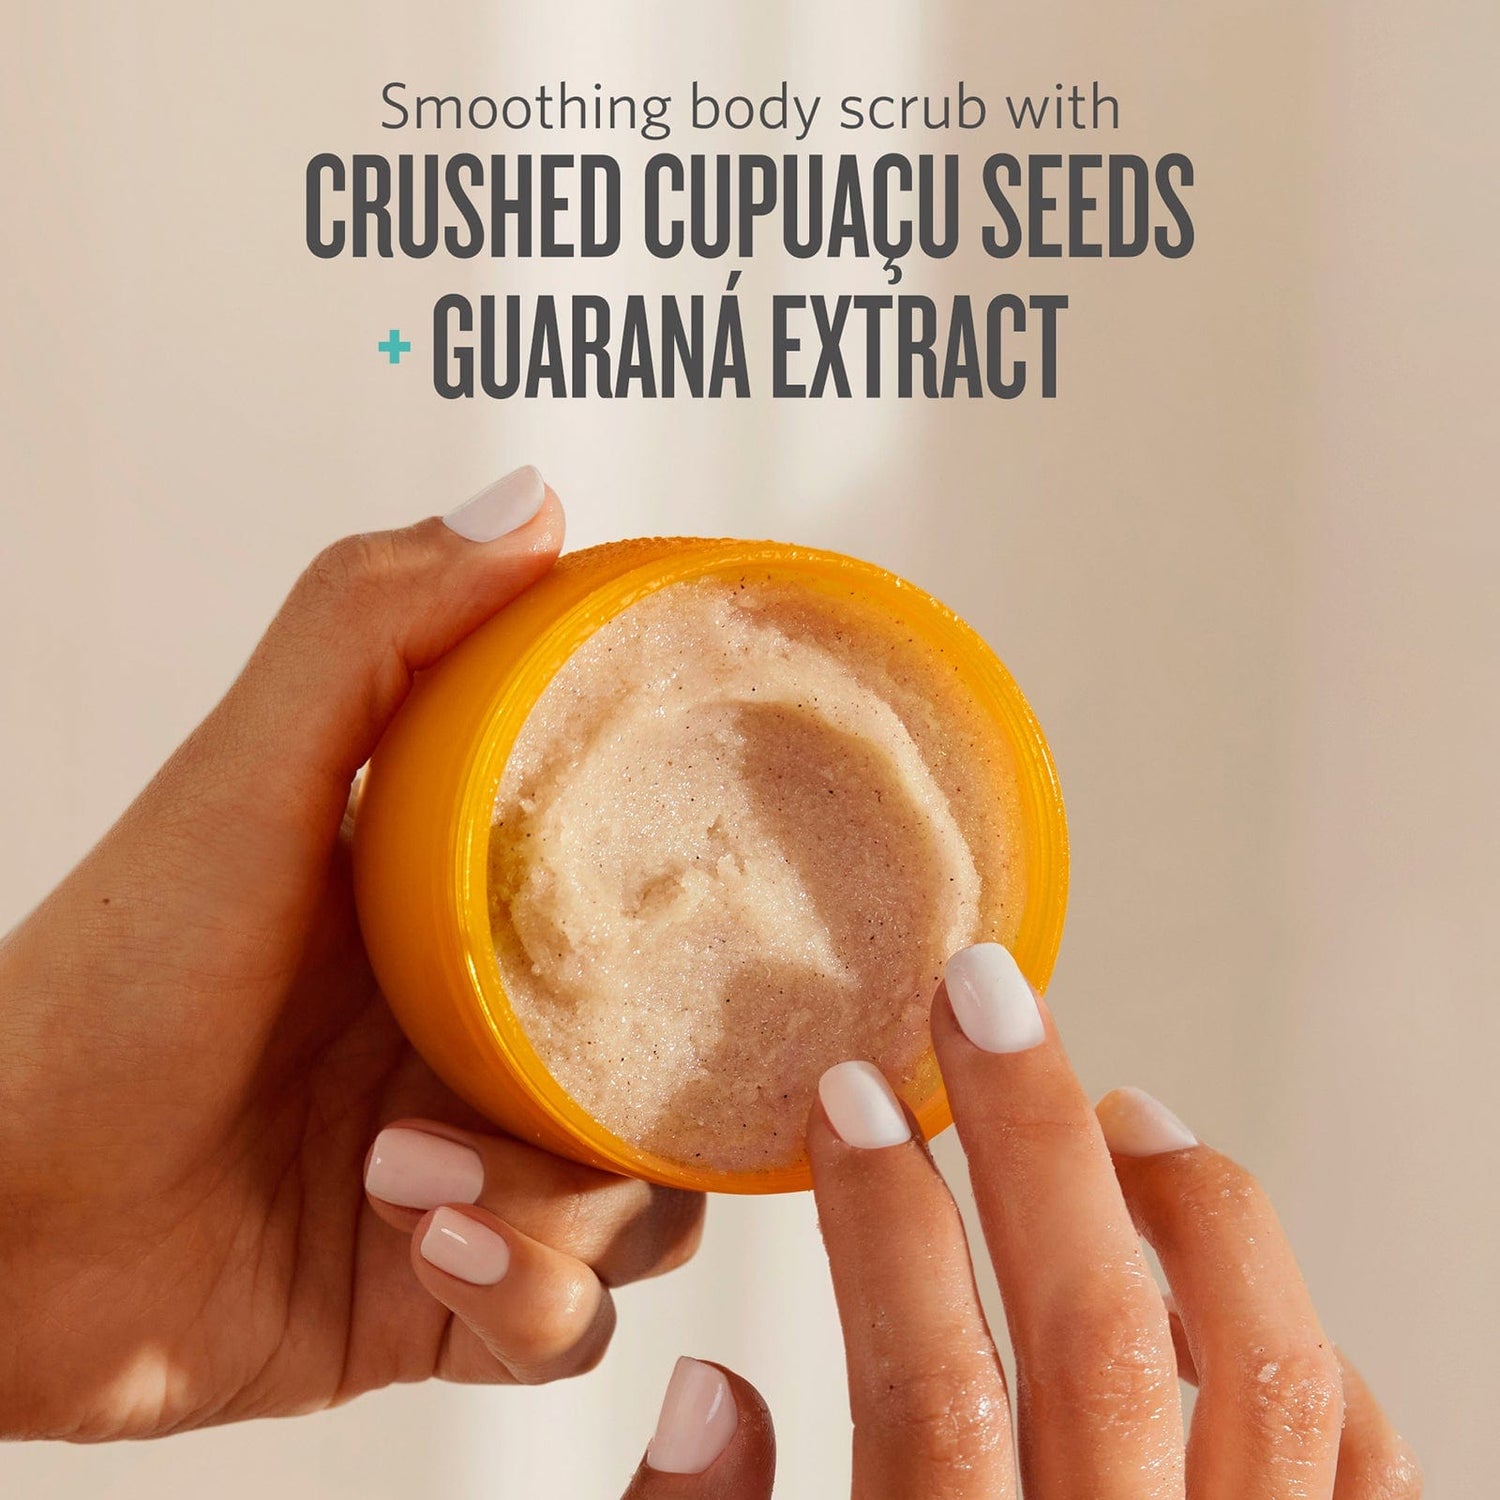 Bum Bum Body Scrub - Smoothing body Scrub with crushed cupuacu seeds and guarana extract